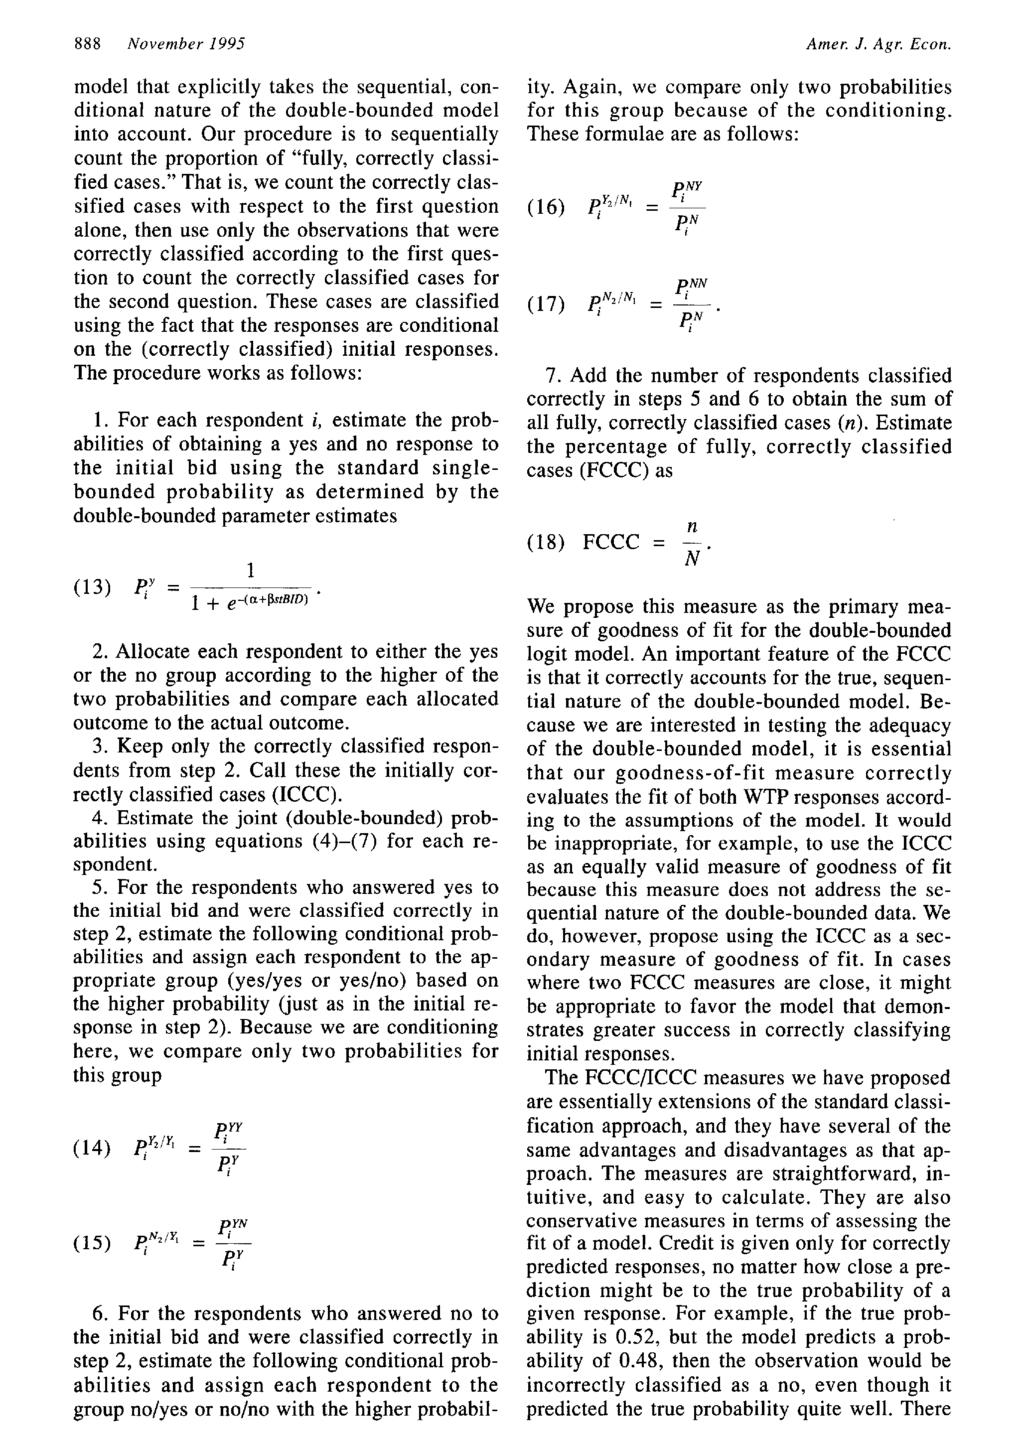 888 November 995 Amer. J. Agr. Econ. model that explicitly takes the sequential, conditional nature of the double-bounded model into account.